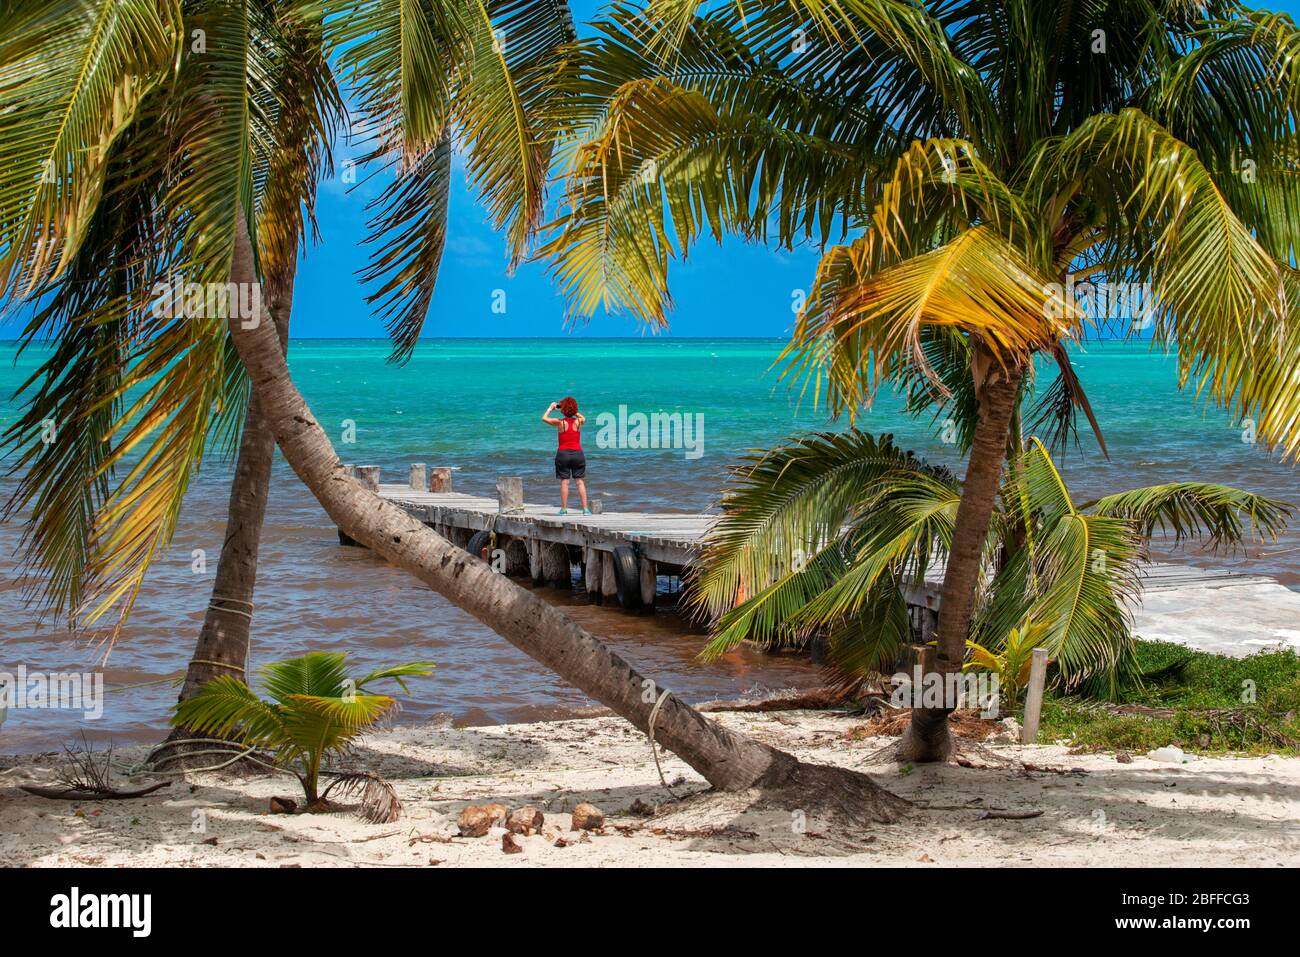 Palms and old pier in Punta Allen Sian Ka'an Reserve, Yucatan Peninsula, Mexico.  In the language of the Mayan peoples who once inhabited this region, Stock Photo